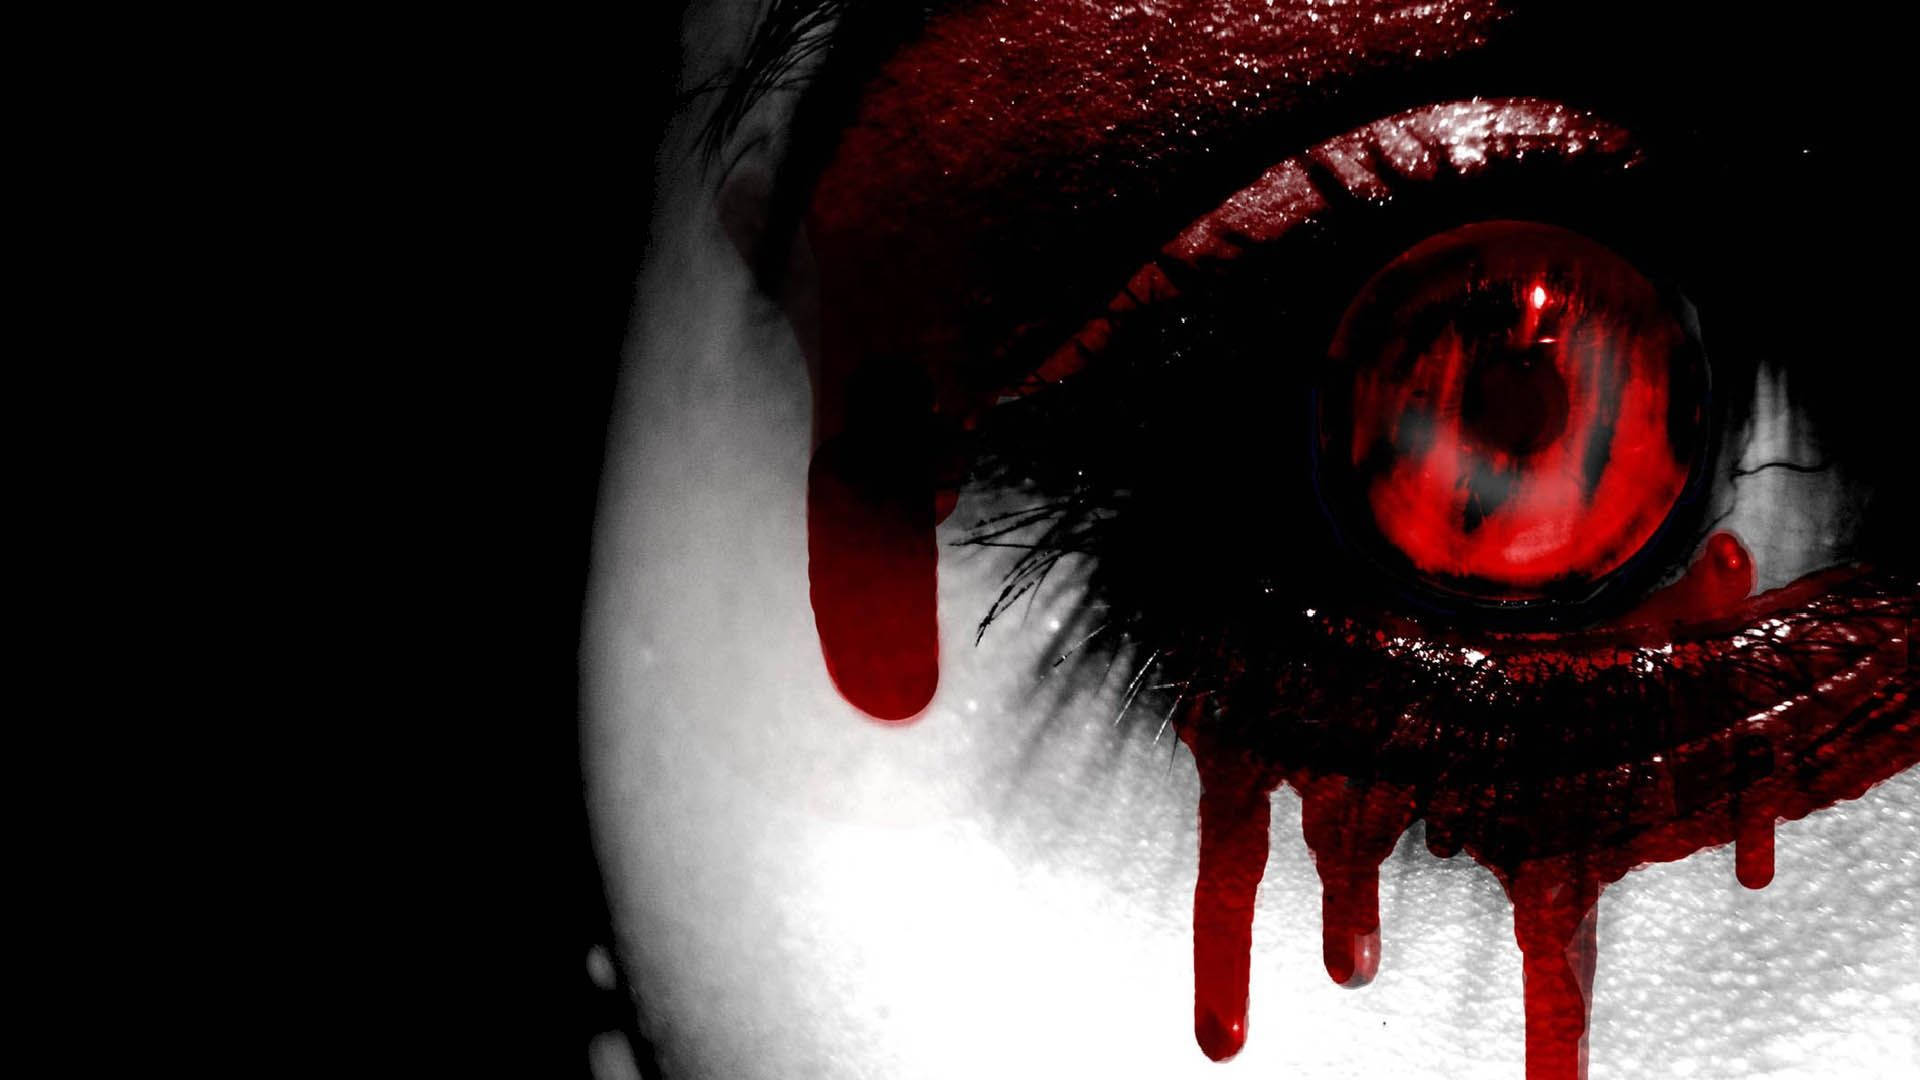 Witness the horror of a Creepy Bloodied Eye Wallpaper